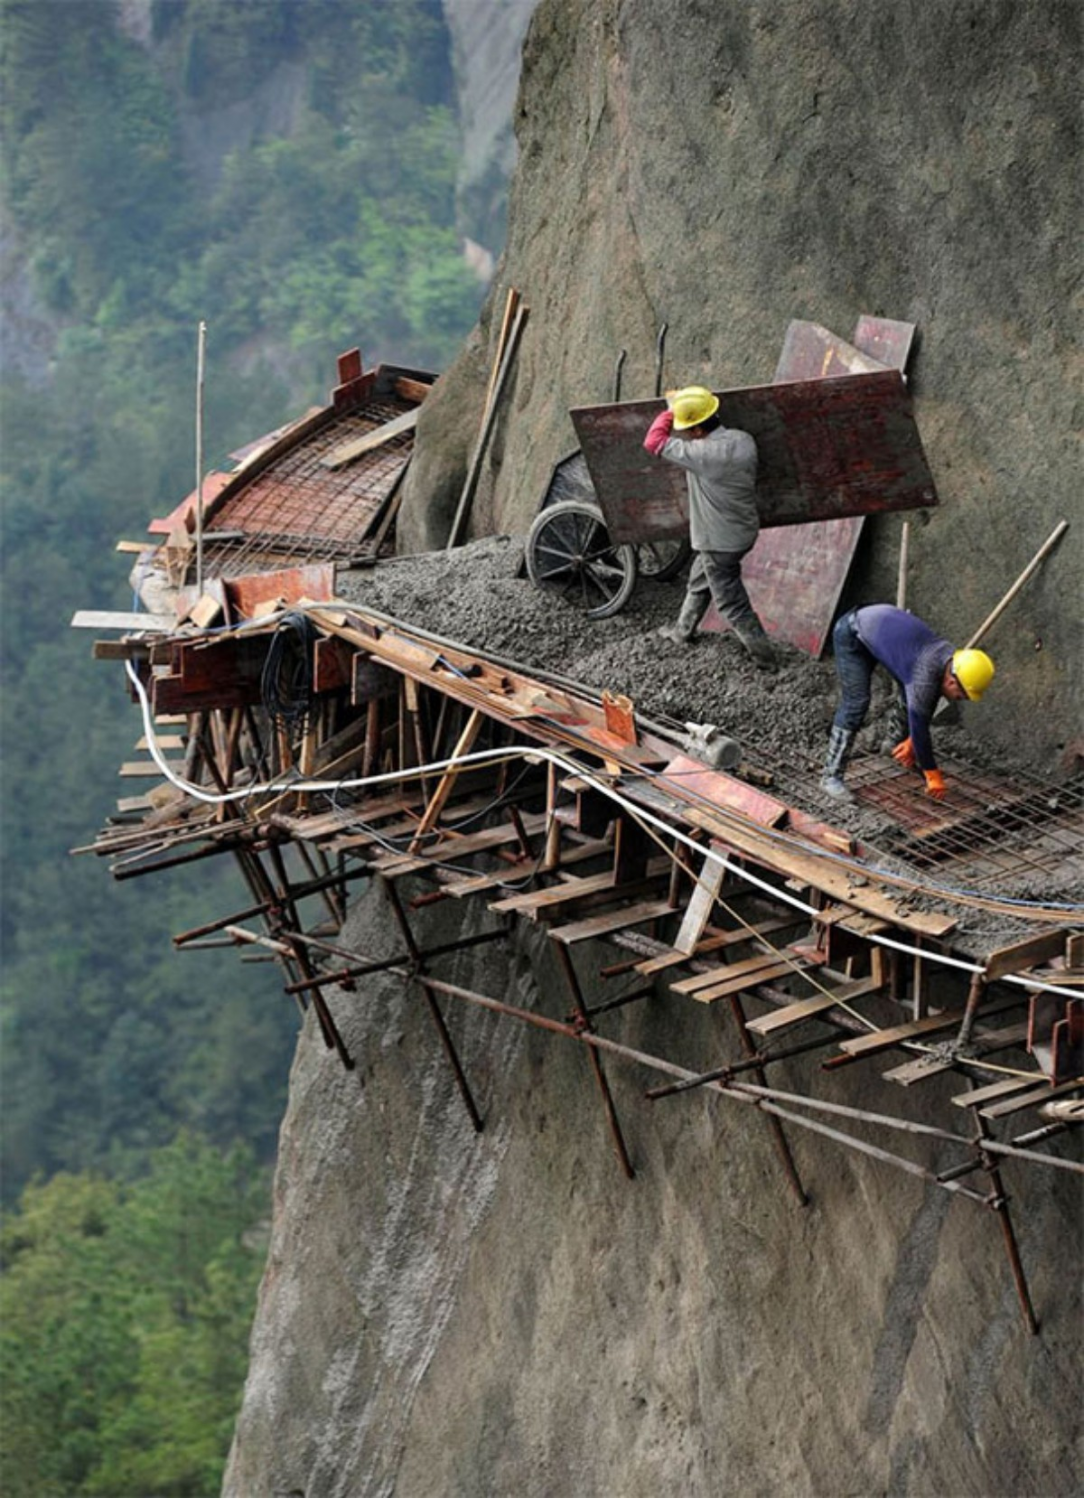 Daredevil works for Chinese builders working on a road in the mountains of Pingjiang County, Hunan province 😵😱